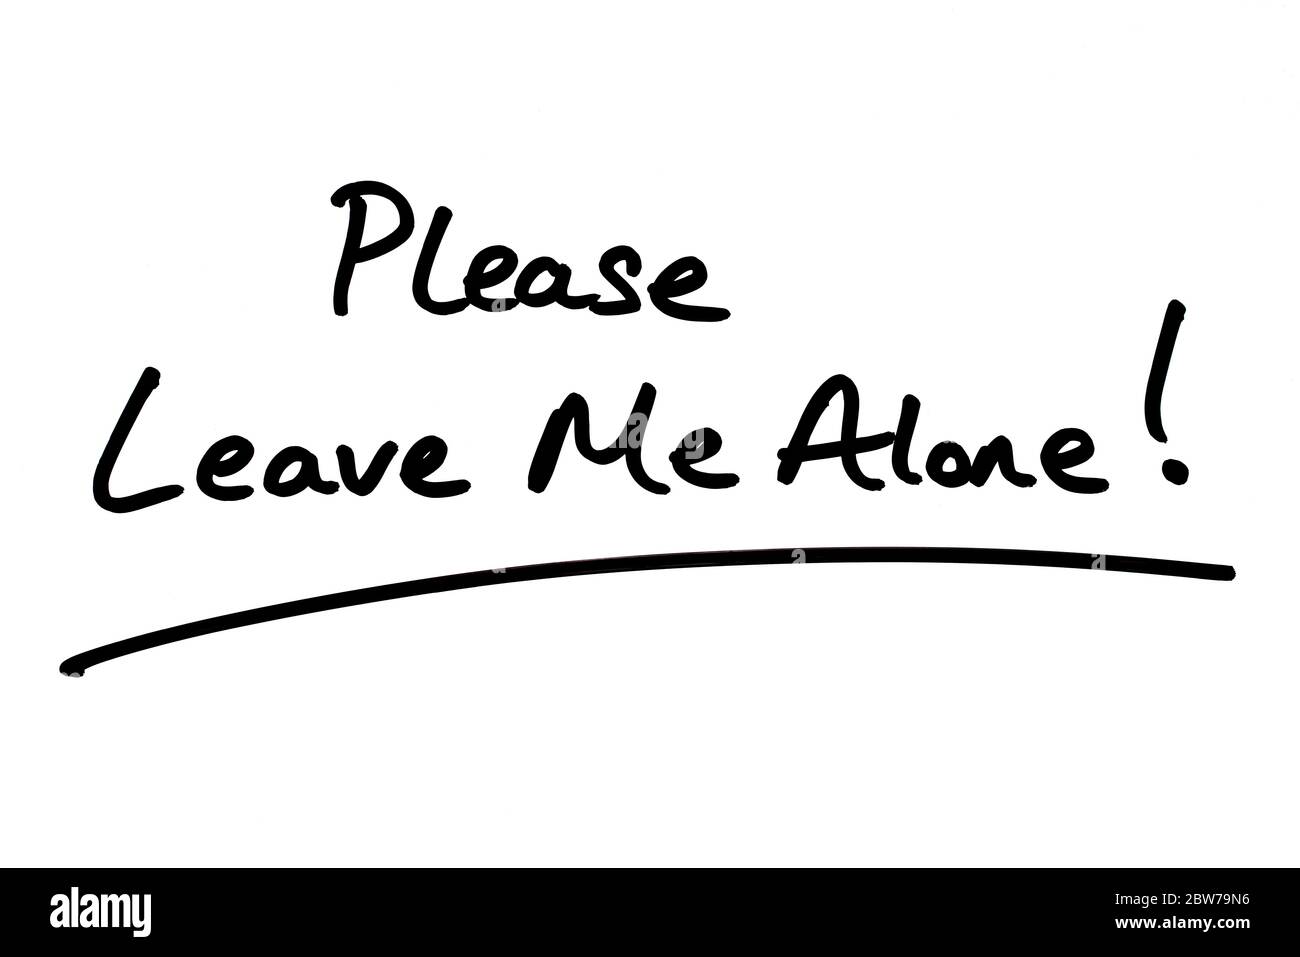 Please Leave Me Alone! handwritten on a white background Stock ...